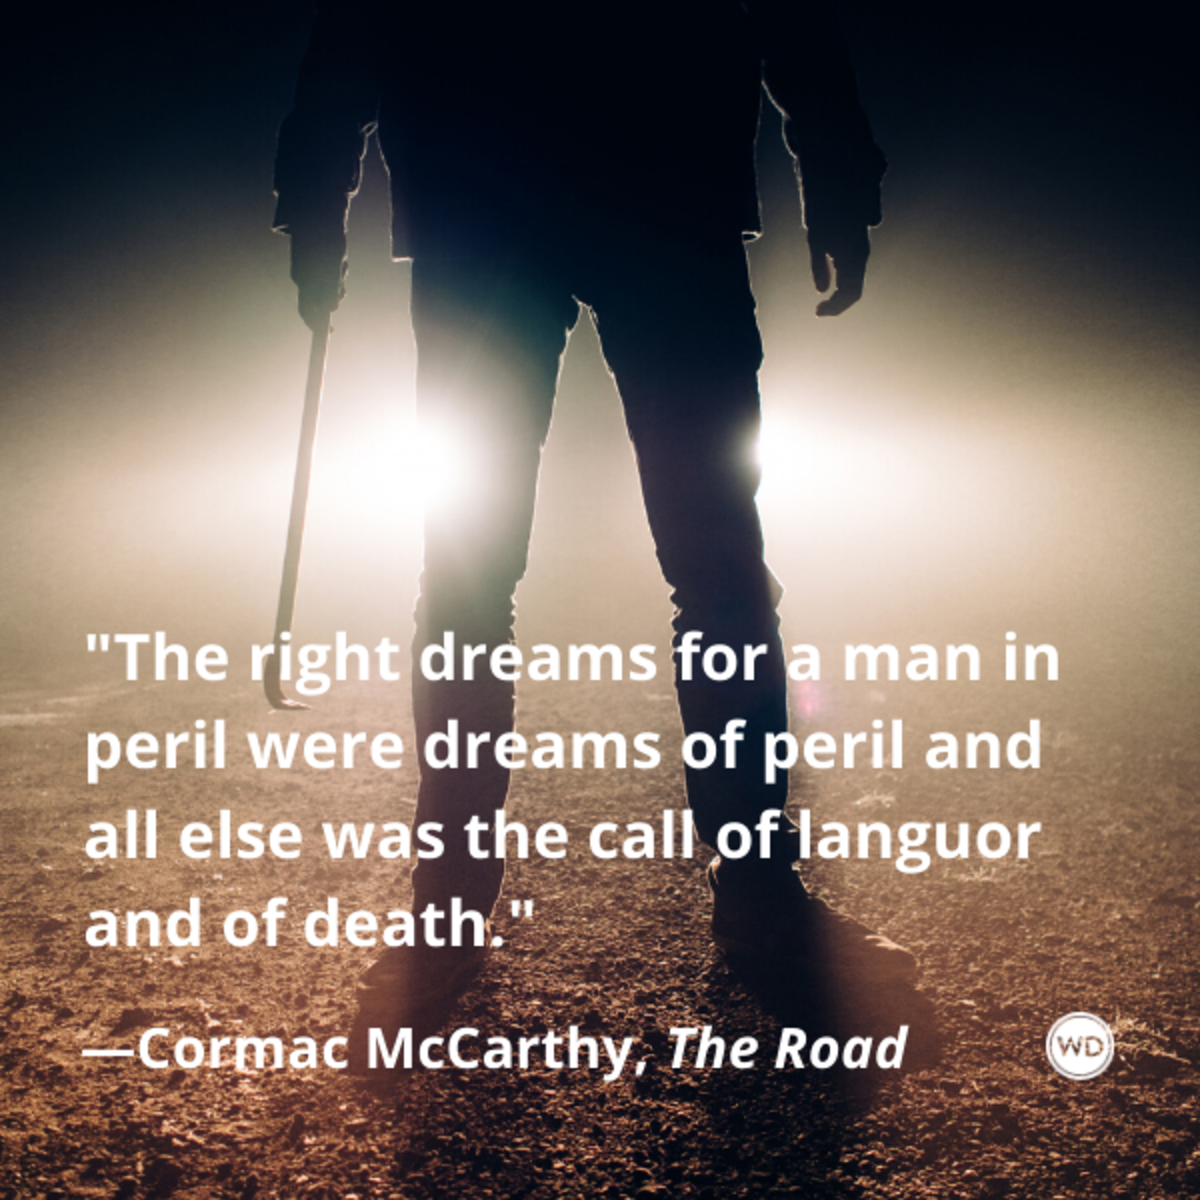 cormac_mccarthy_the_road_quotes_the_right_dreams_for_a_man_in_peril_were_dreams_peril_and_all_else_was_the_call_of_languor_and_of_death